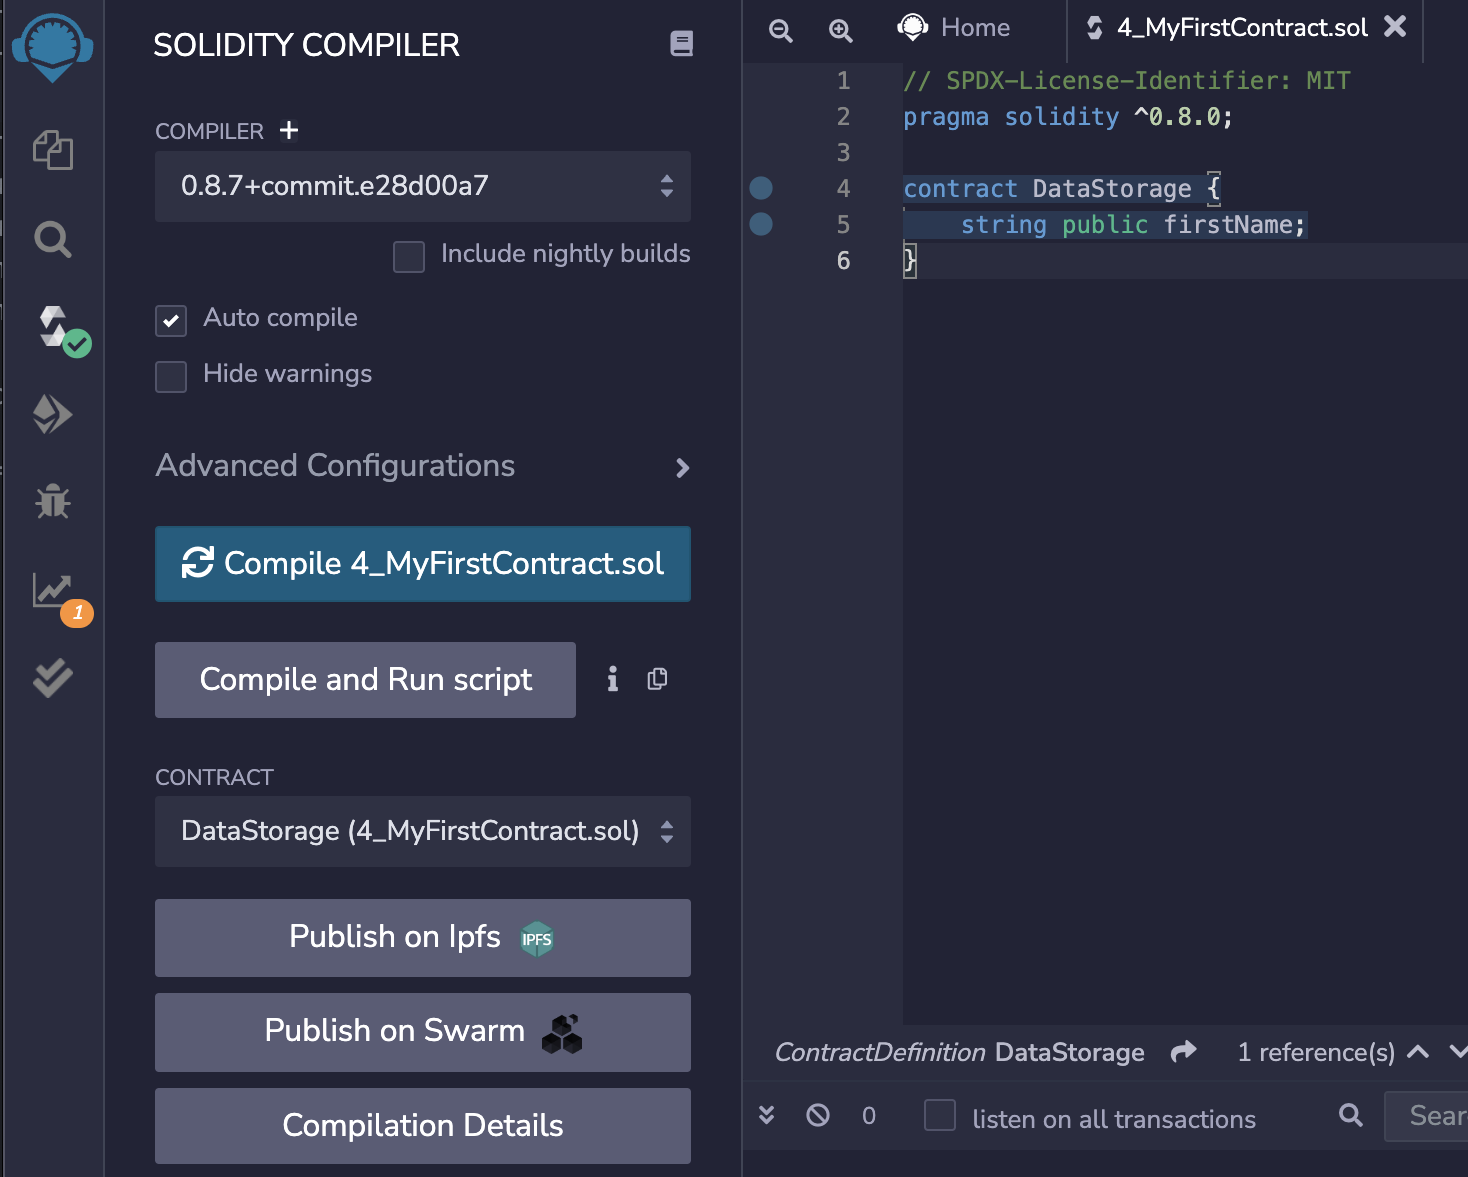 We can click the blue Compile button to compile our Solidity code to bytecode.